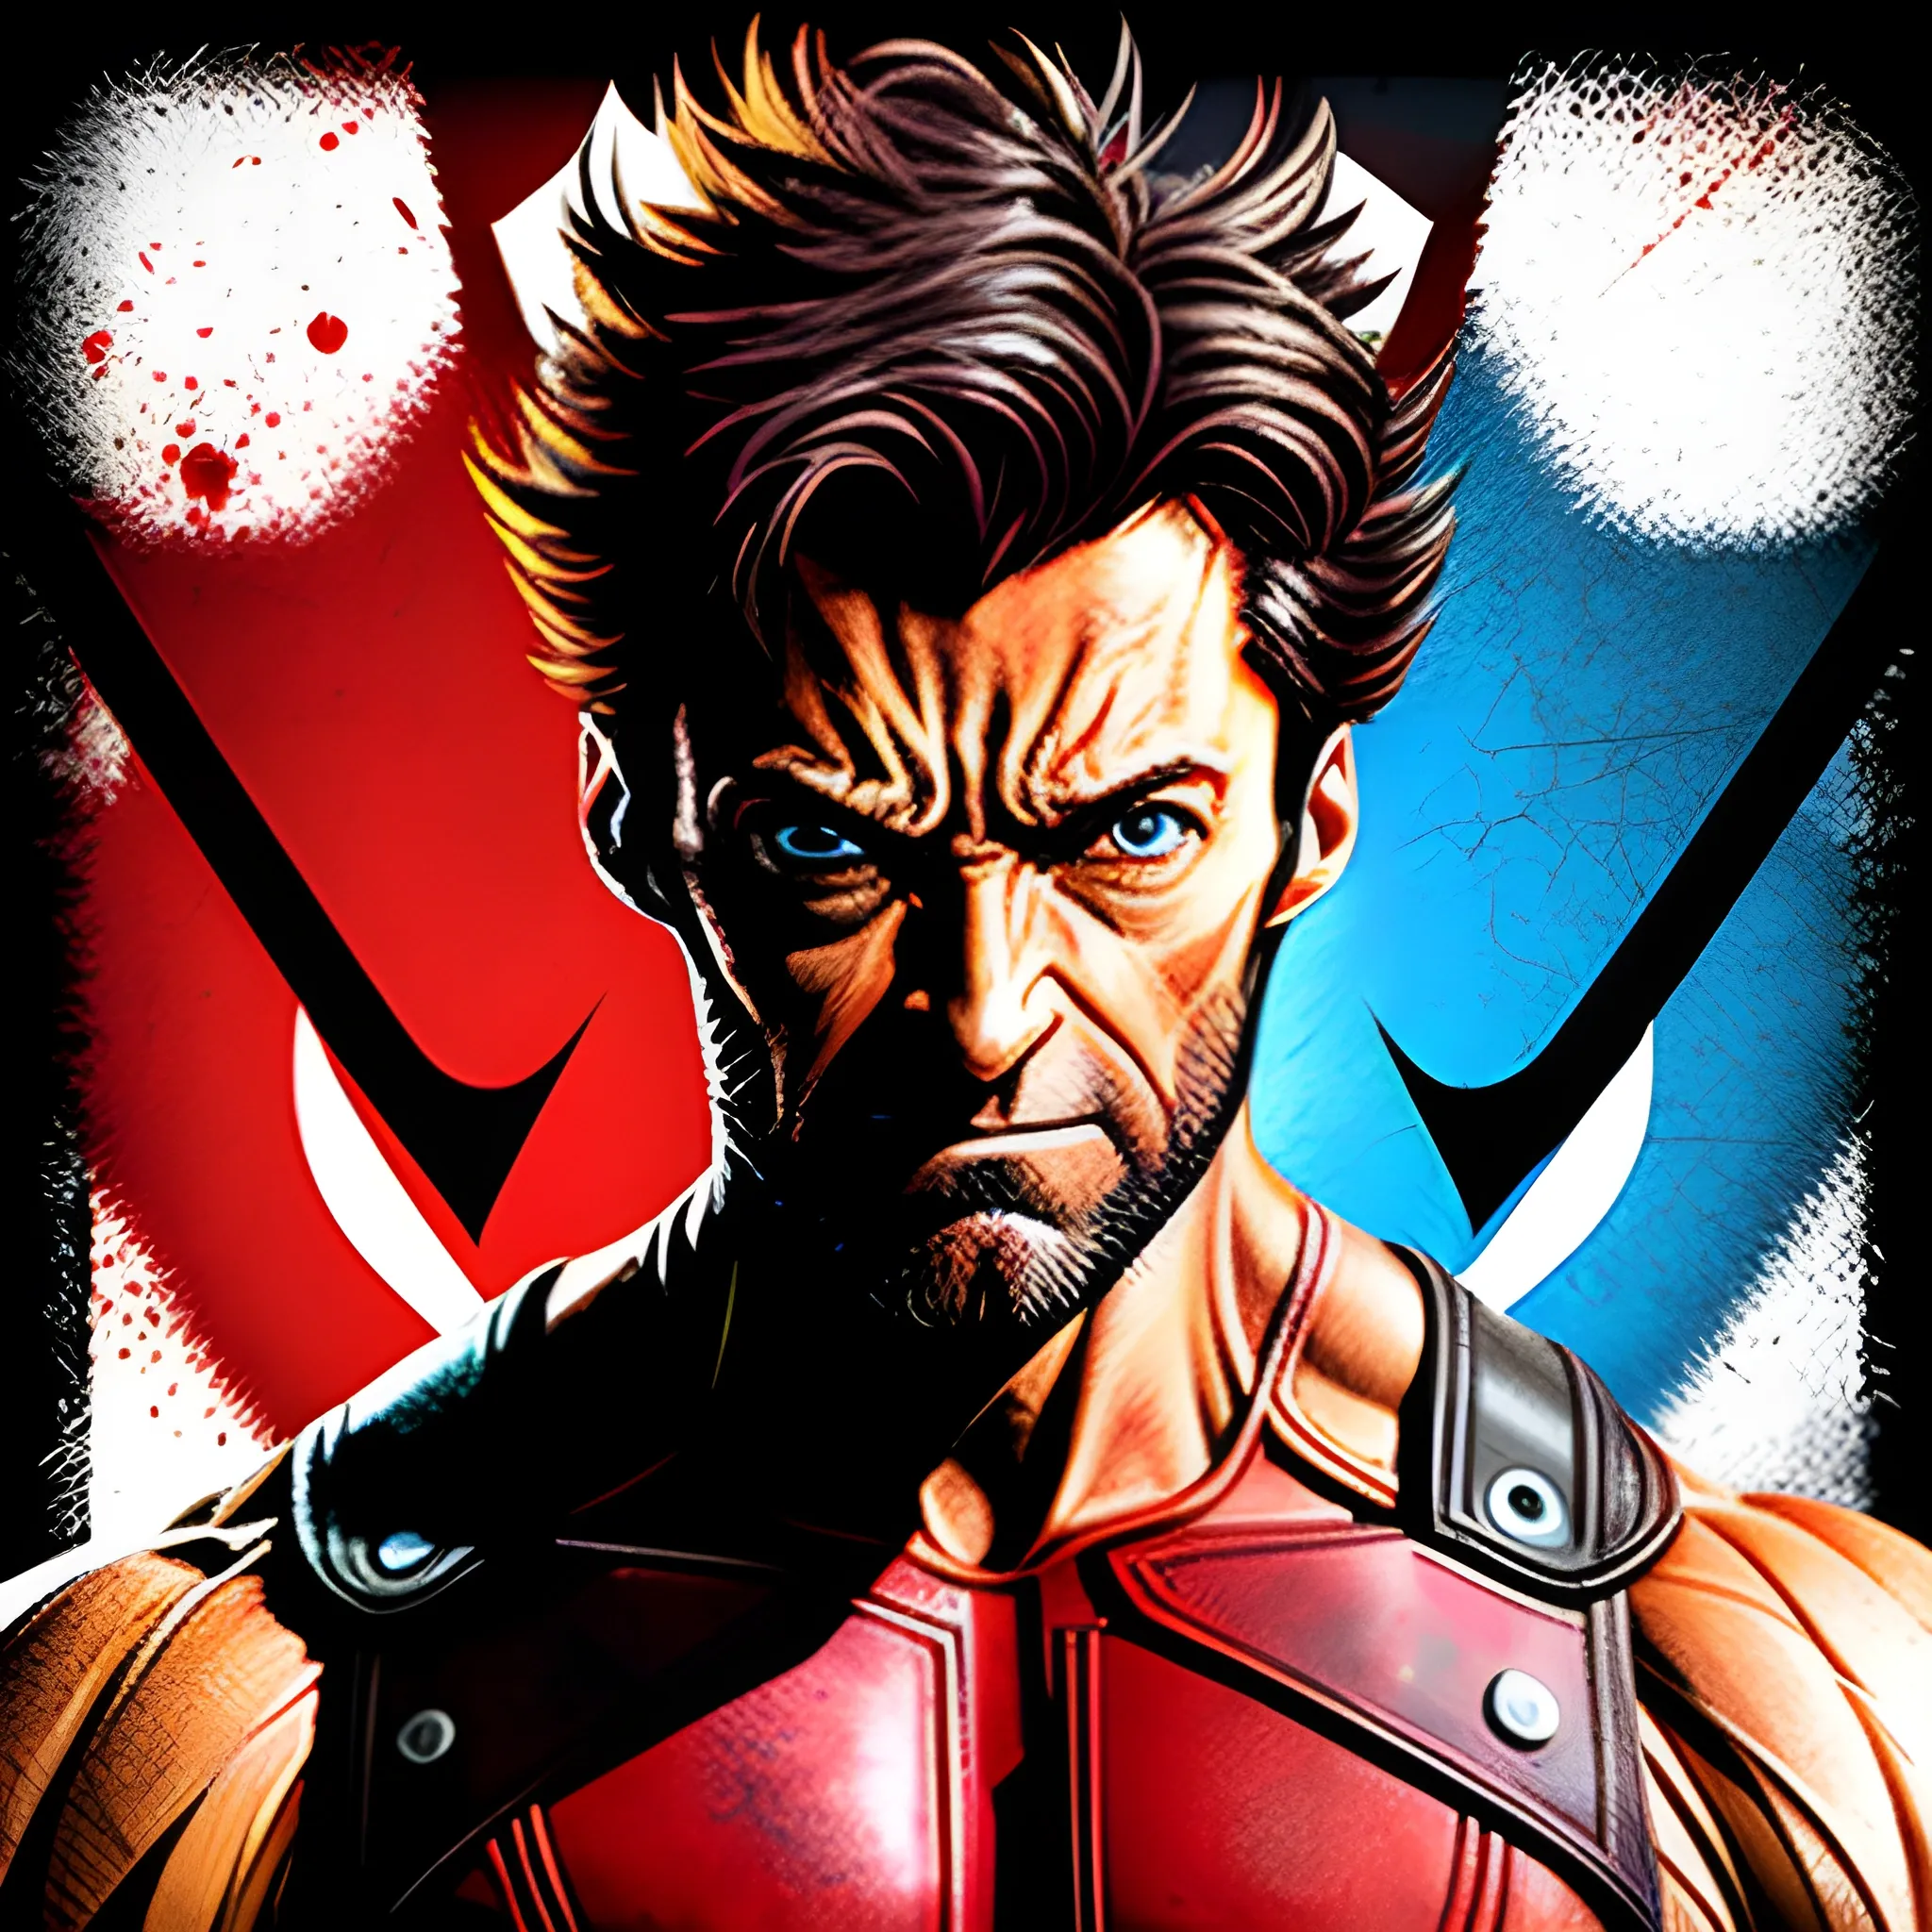 Hugh Jackman as Wolverine, fighthing with deadpool,  anime style, 3D